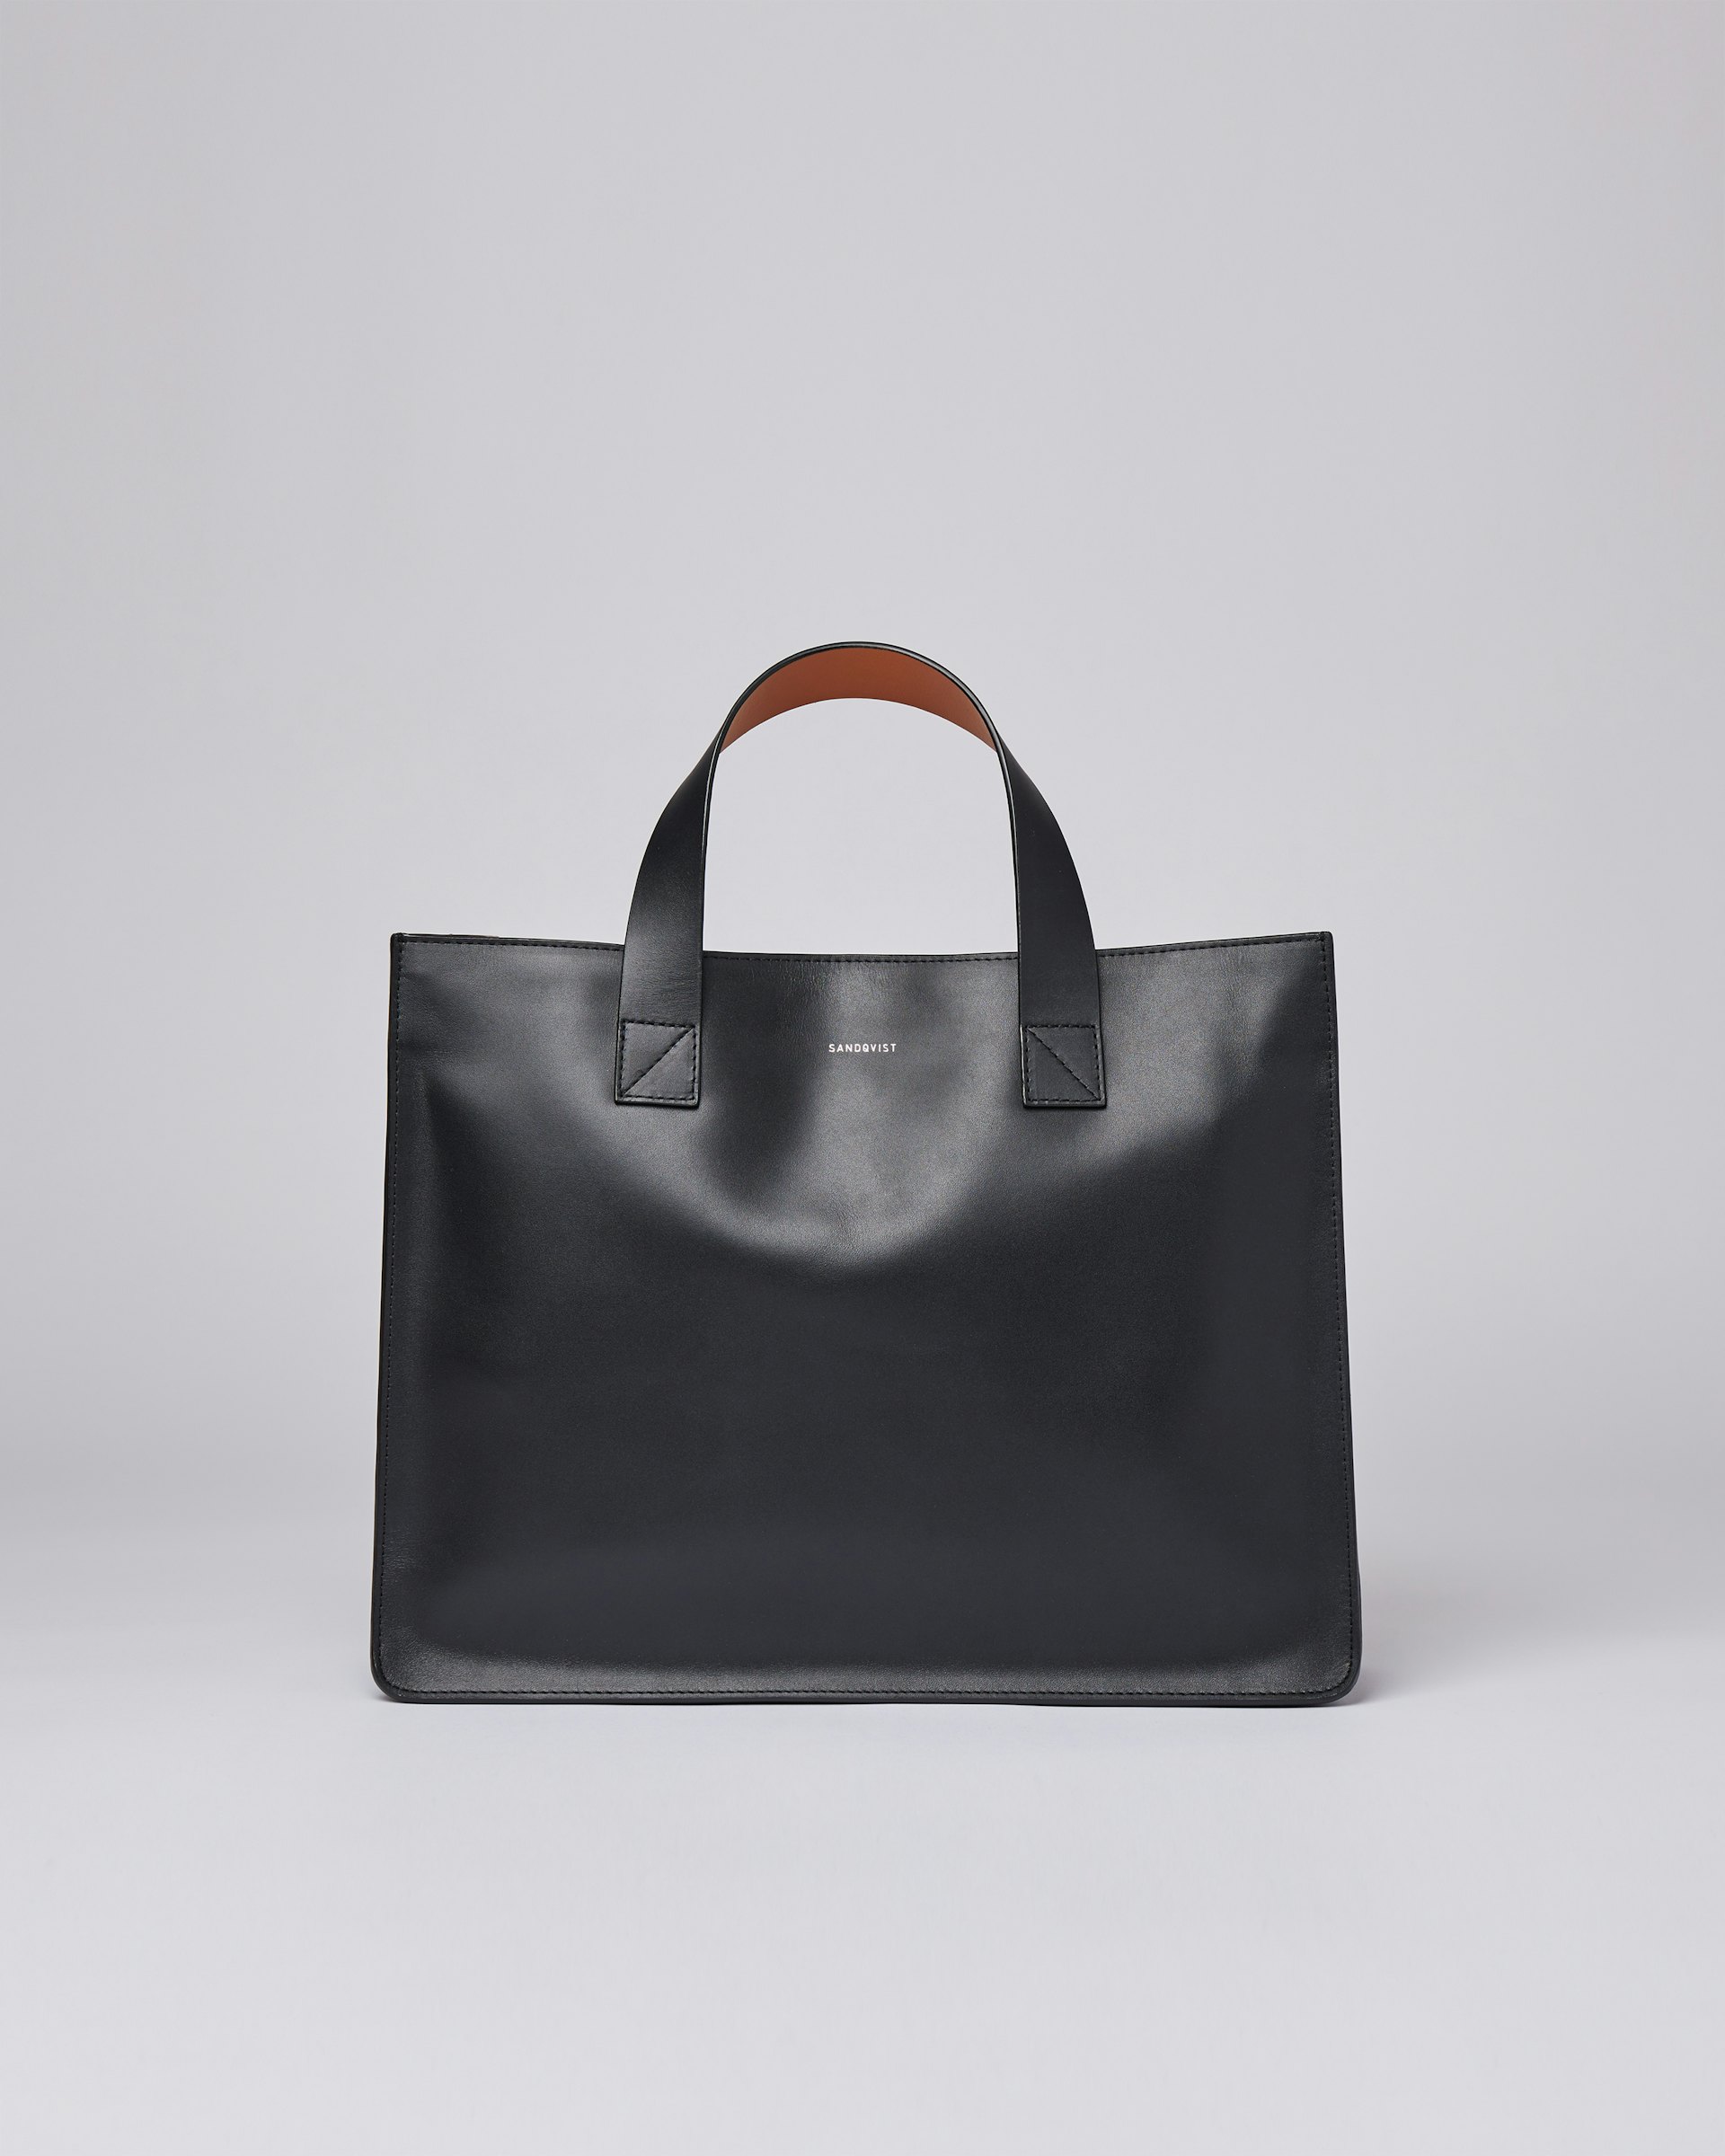 Edie belongs to the category Tote bags and is in color black (1 of 7)